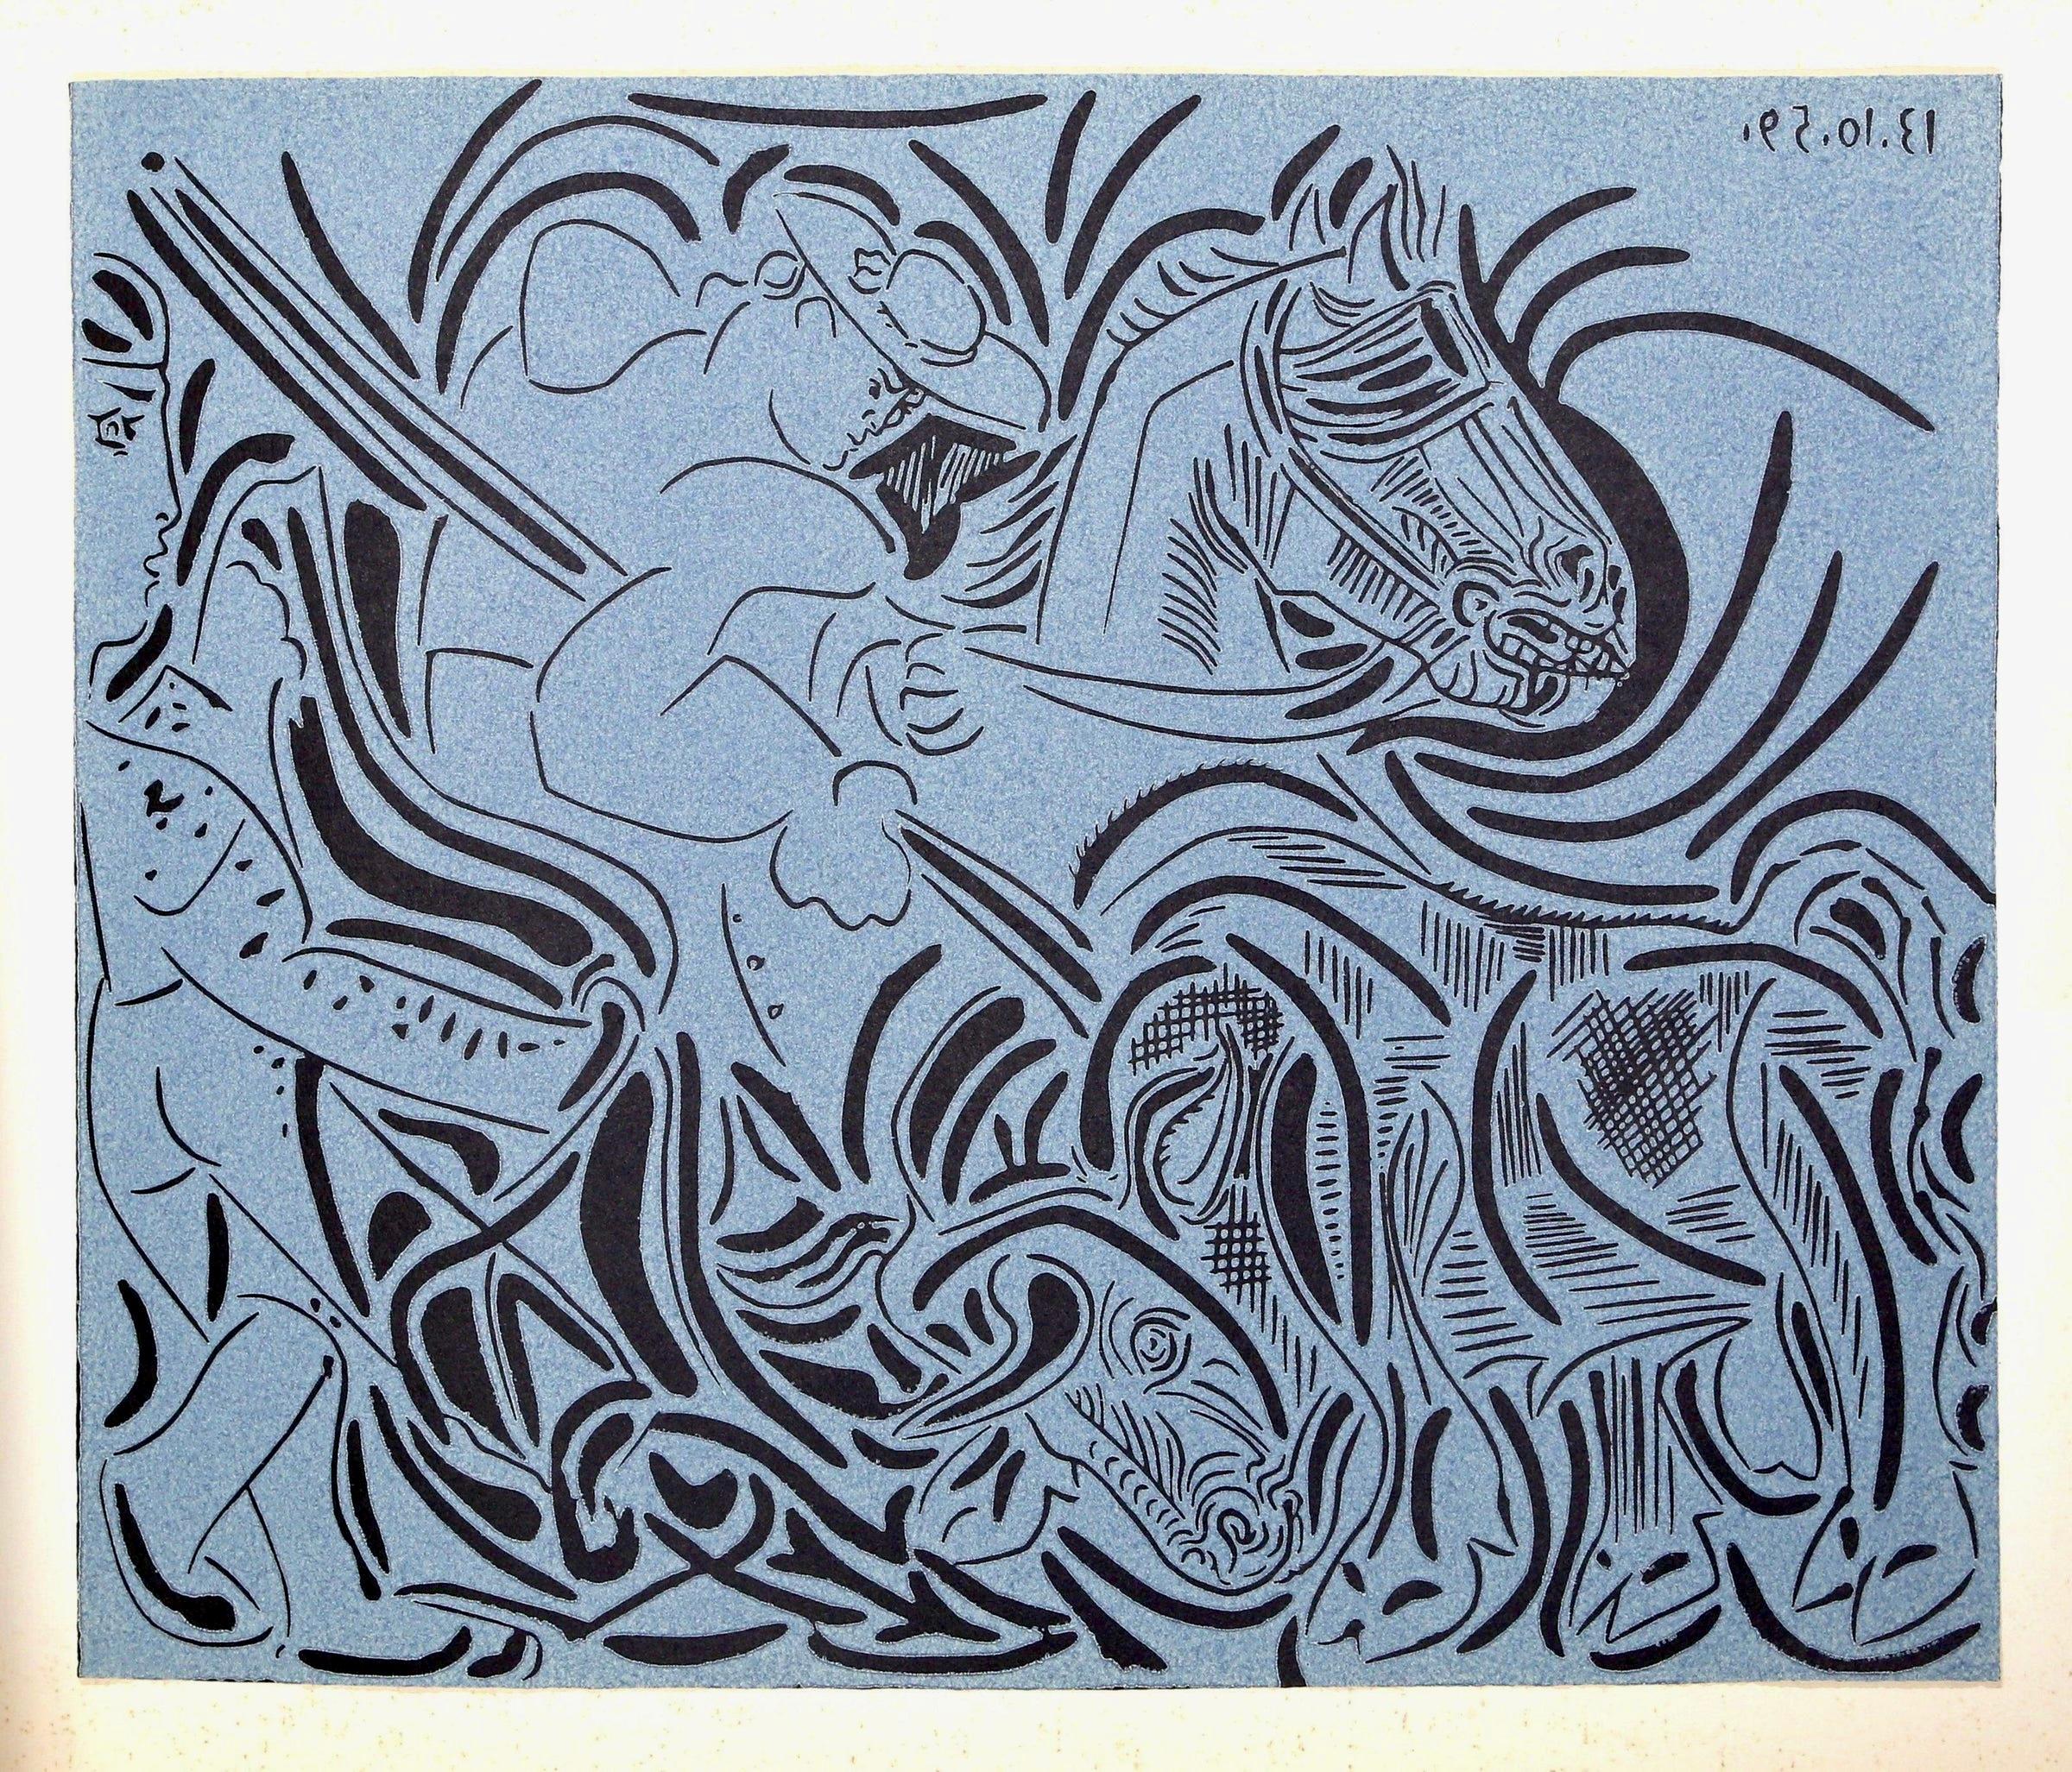 Picasso, Lance III, Pablo Picasso-Linogravures (after) For Sale 4